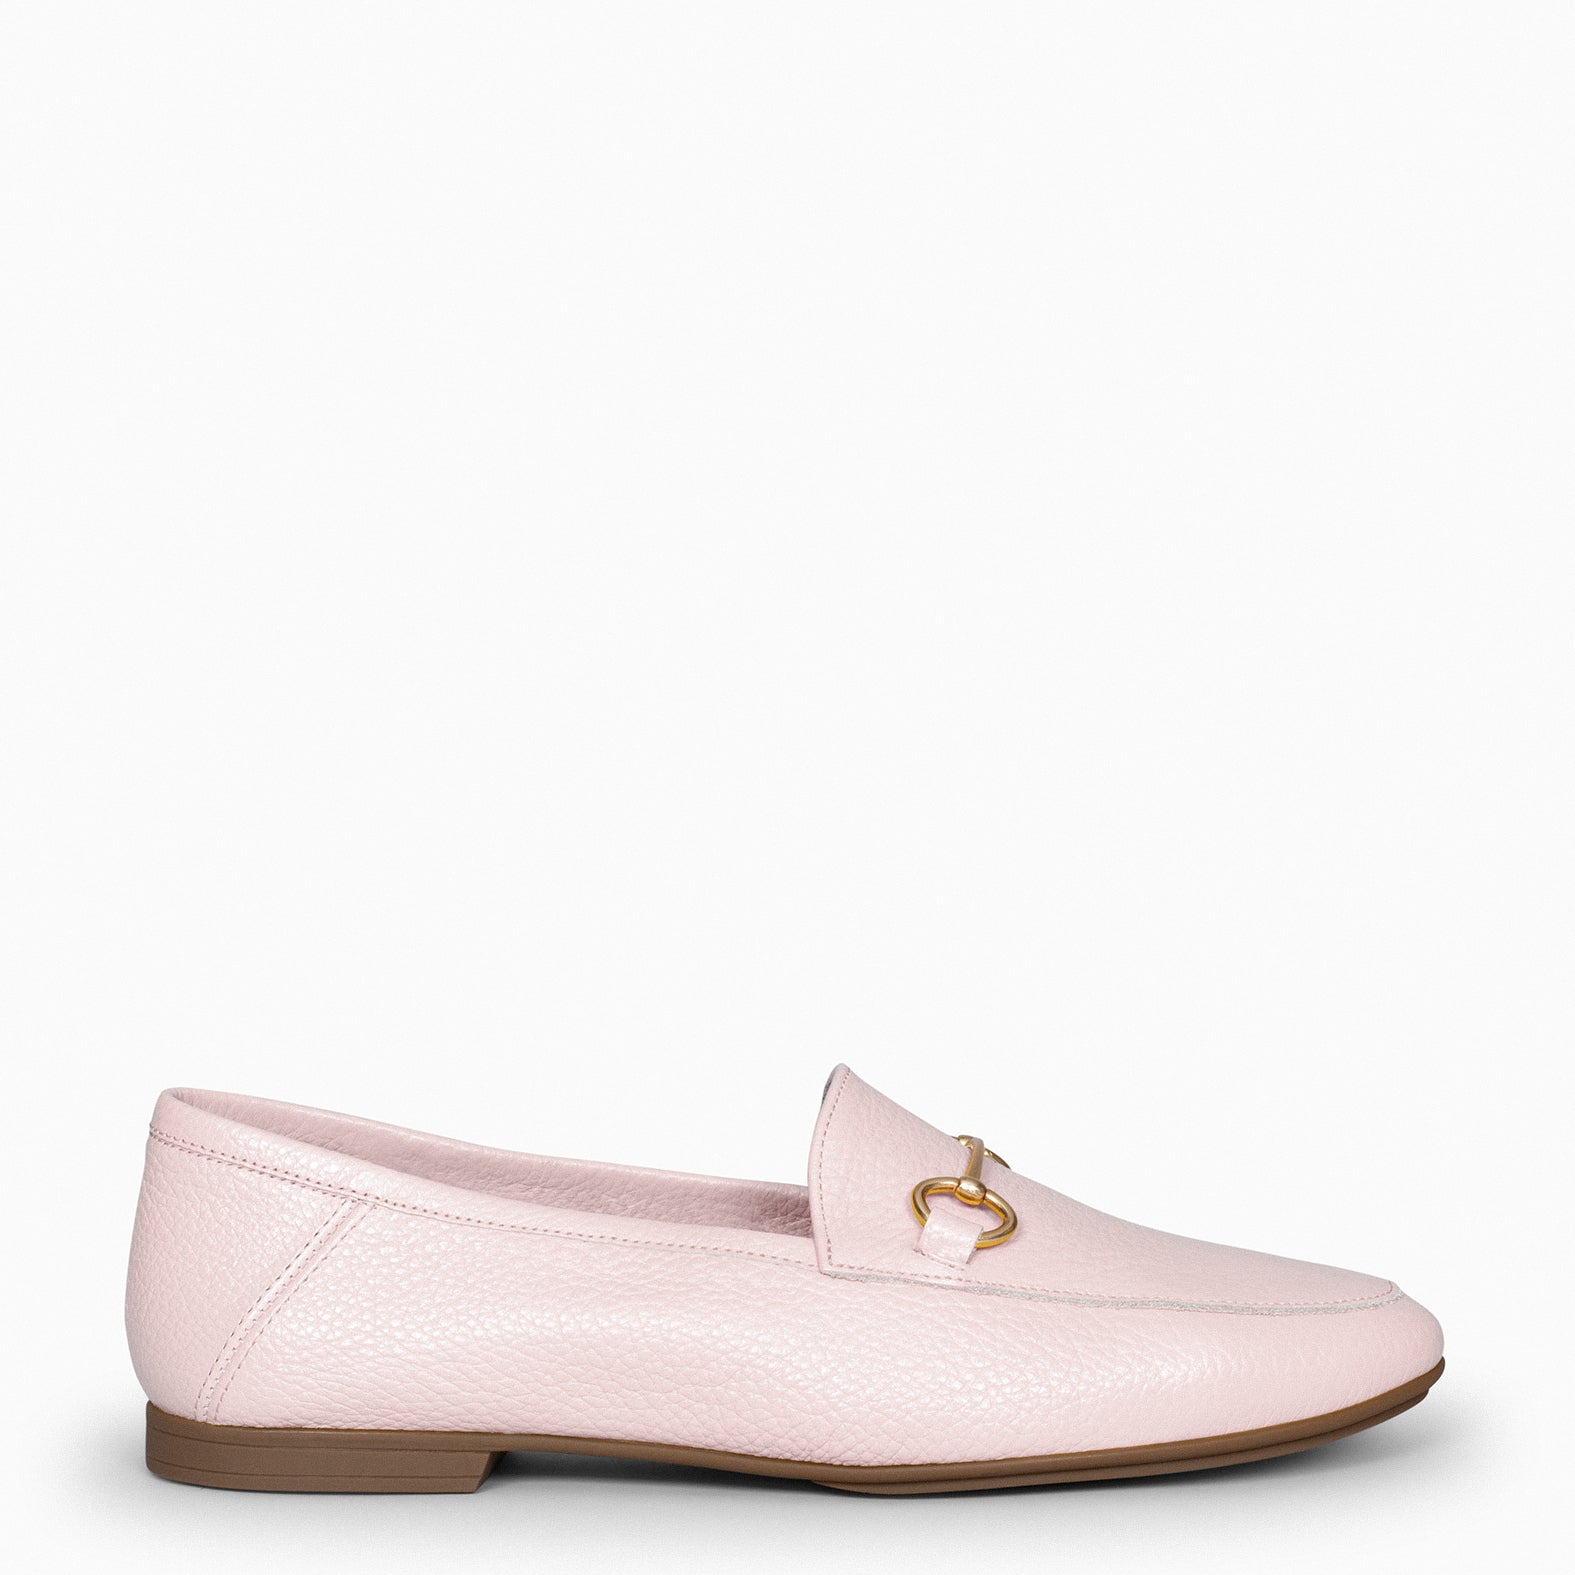 STYLE – PINK moccasins with horsebit